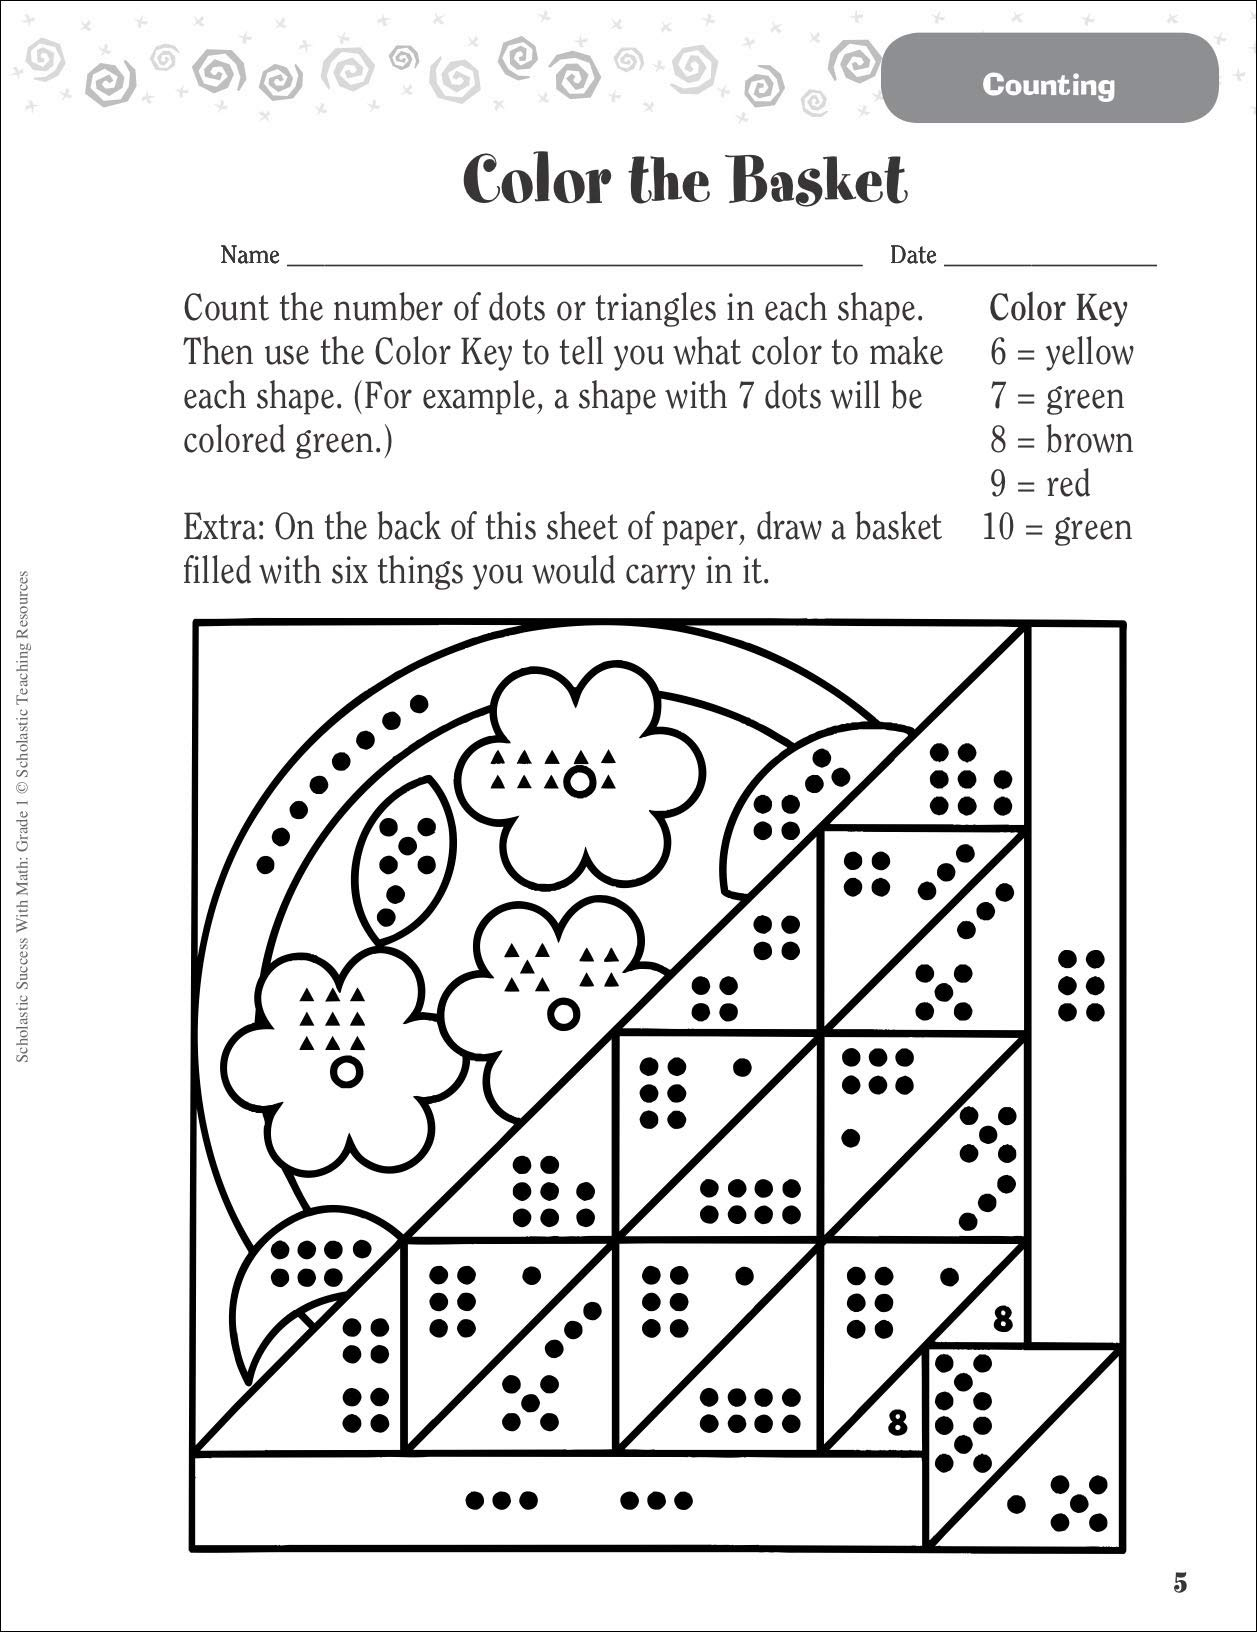 Reading Worskheets: Create Math Worksheets Printable Blank intended for Printable Multiplication Rhymes